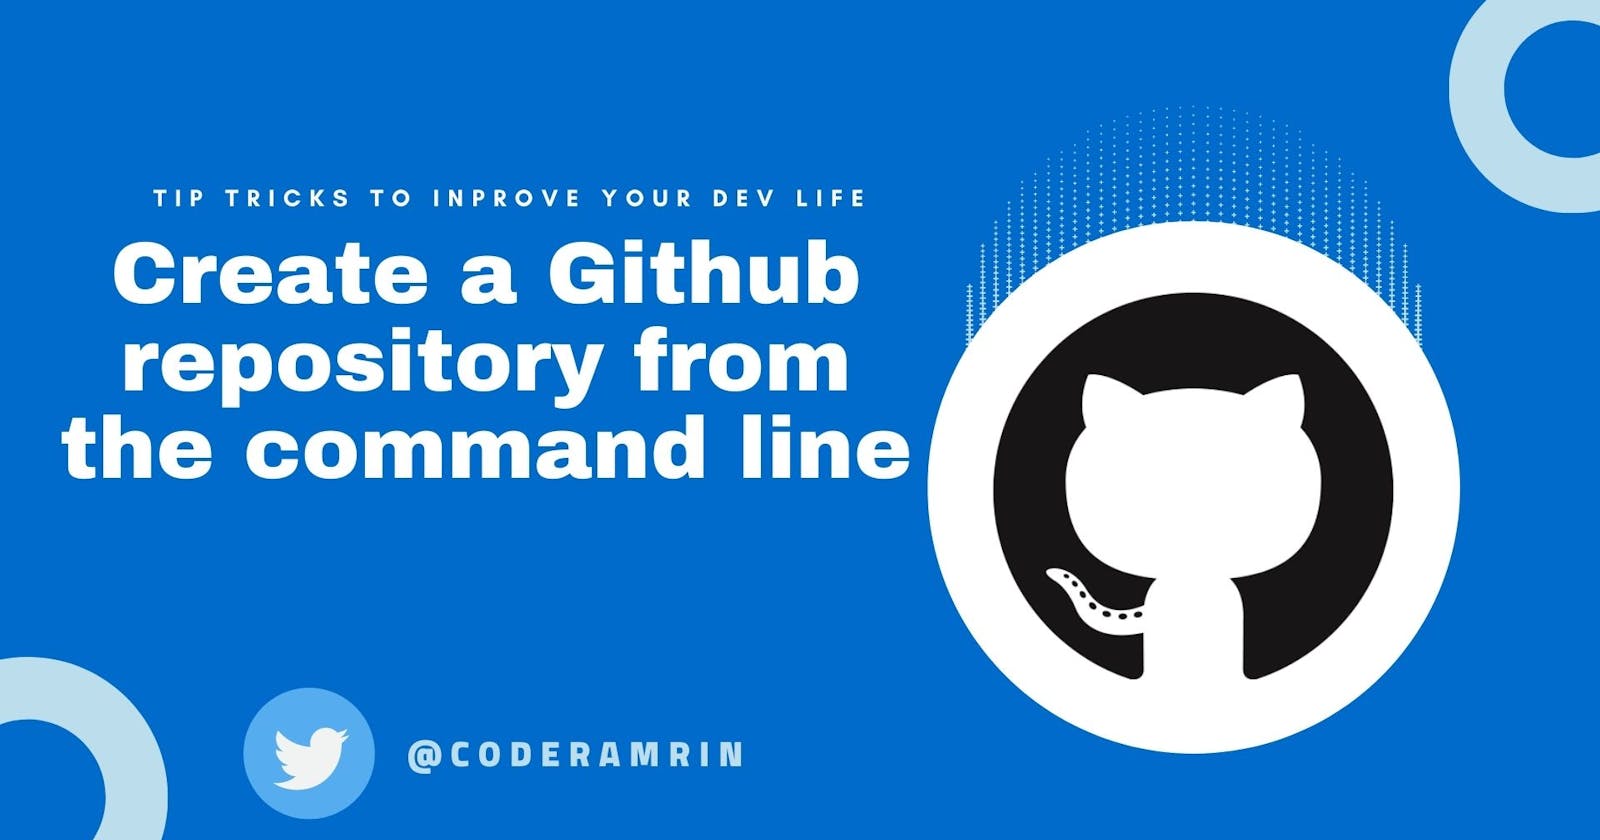 How to create a Github repository from the command line?